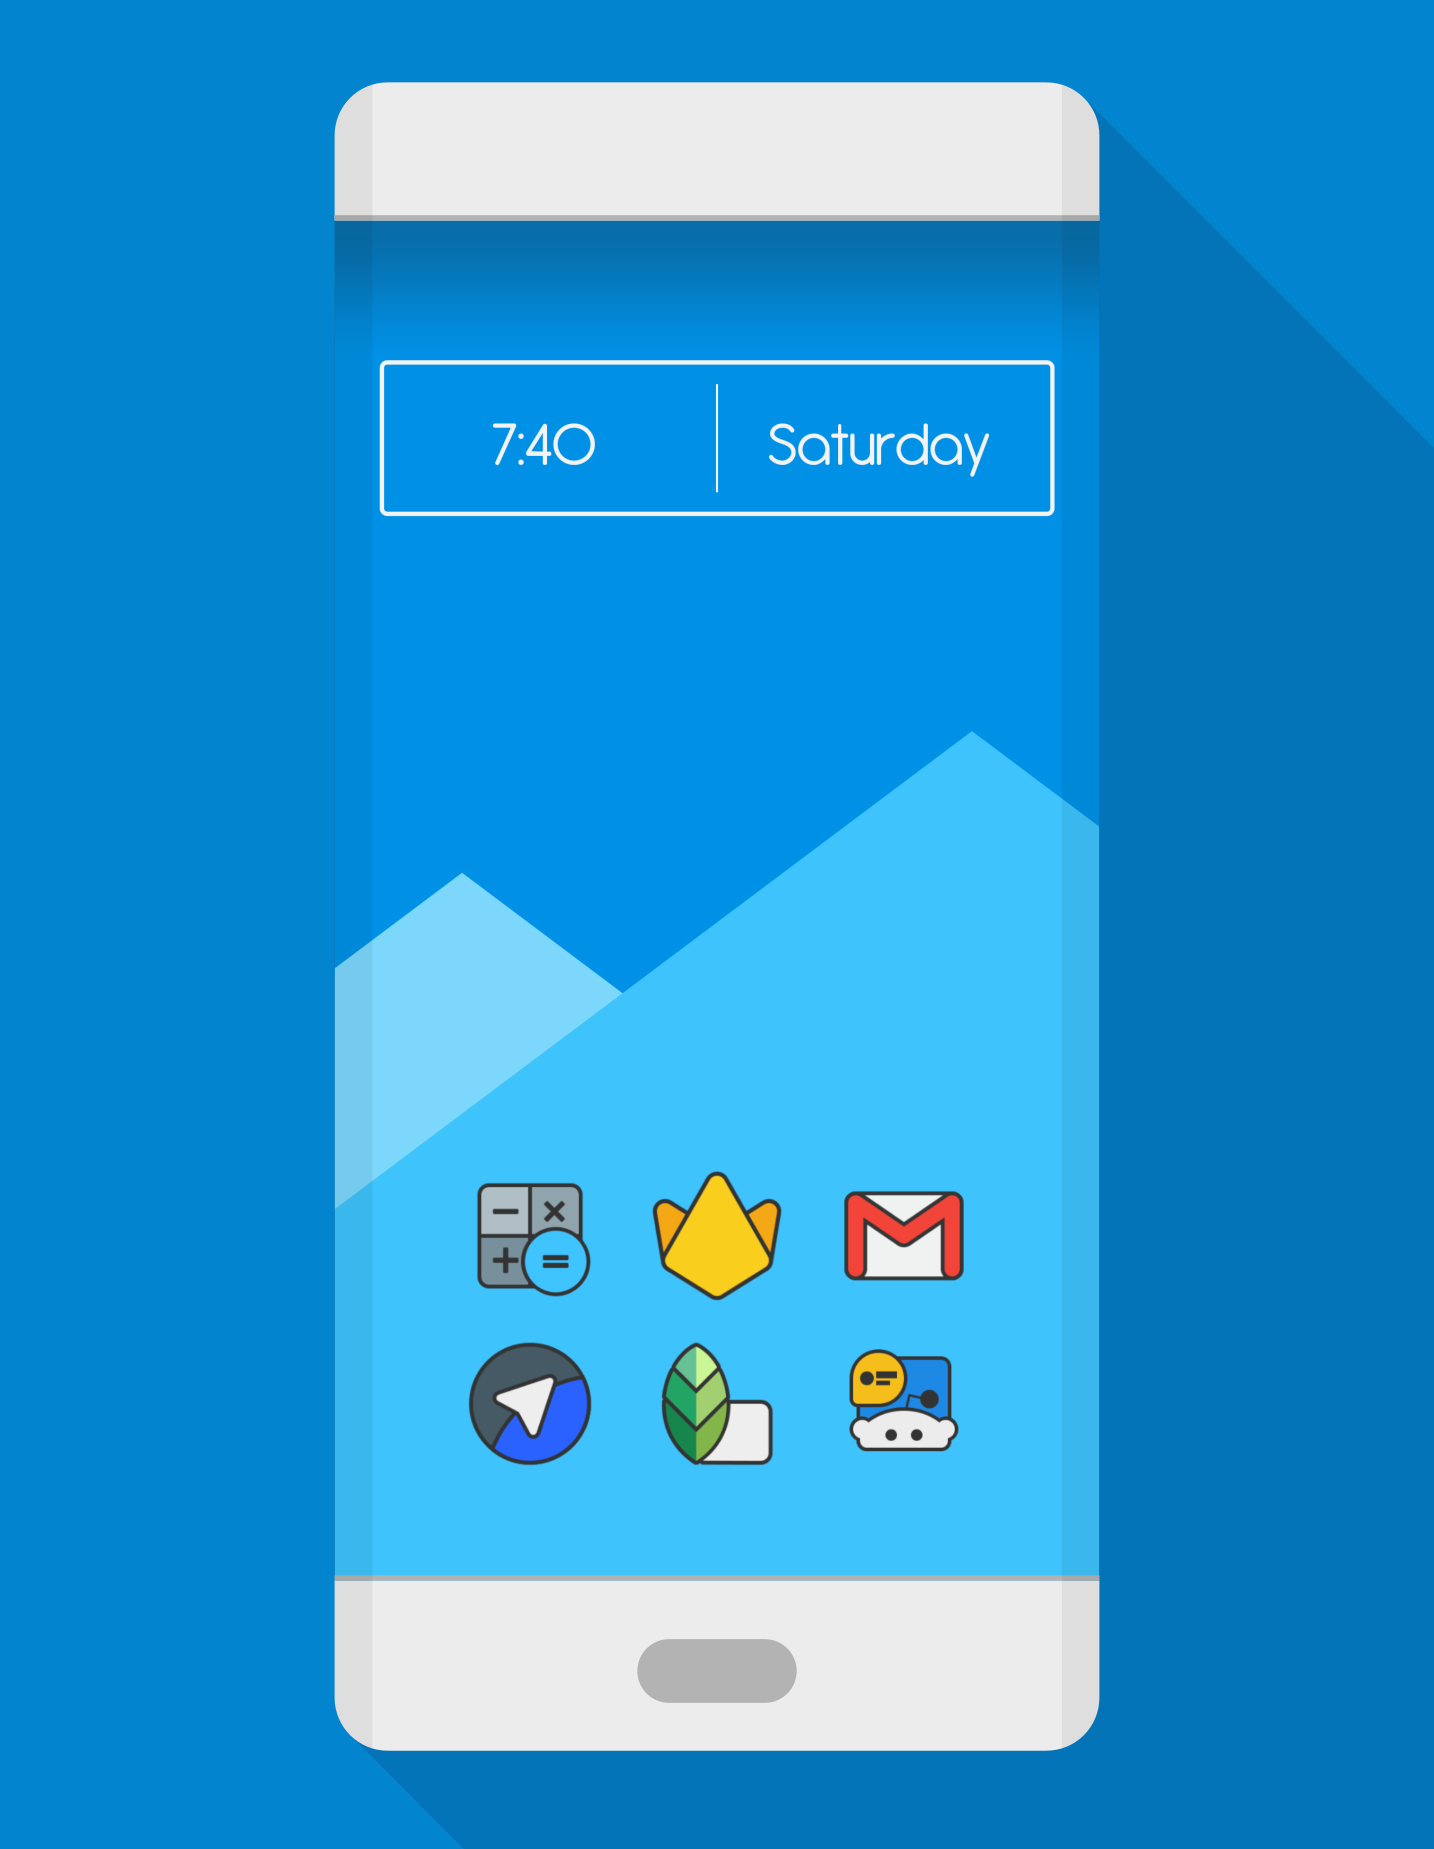 Android application DARKMATTER - ICON PACK screenshort